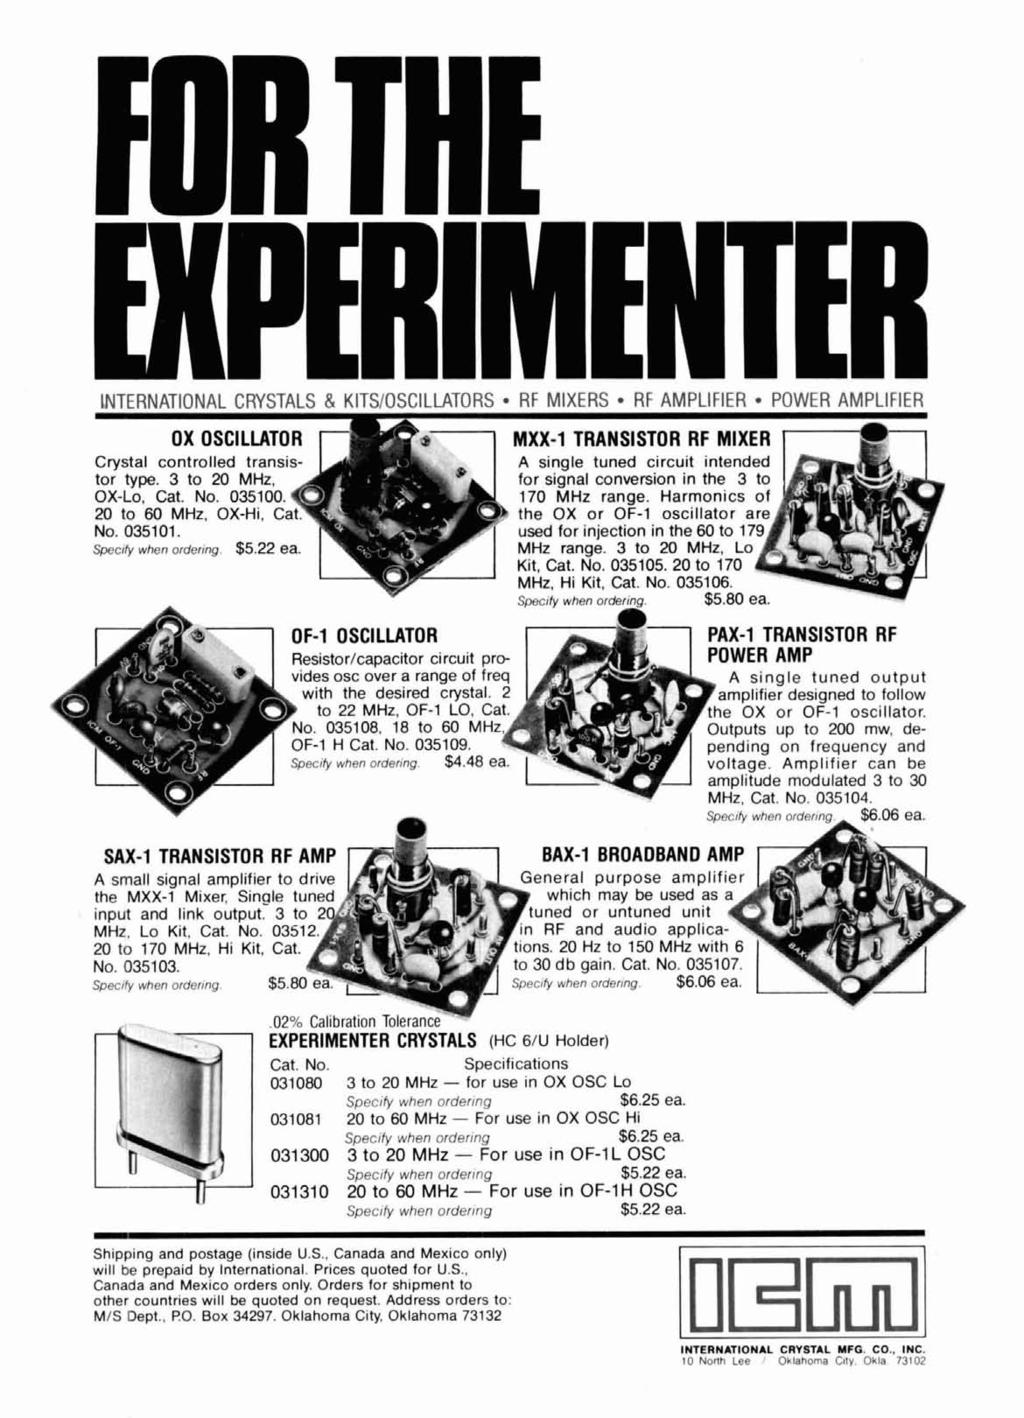 FOR THE EXPERIMENTER -- ----- - INTERNATIONAL CRYSTALS & KITSIOSCILLATORS RF MIXERS RF AMPLIFIER POWER AMPLIFIER Crystal controlled transistor type. 3 to 20 MHz. OX-Lo. Cat. No. 035100.